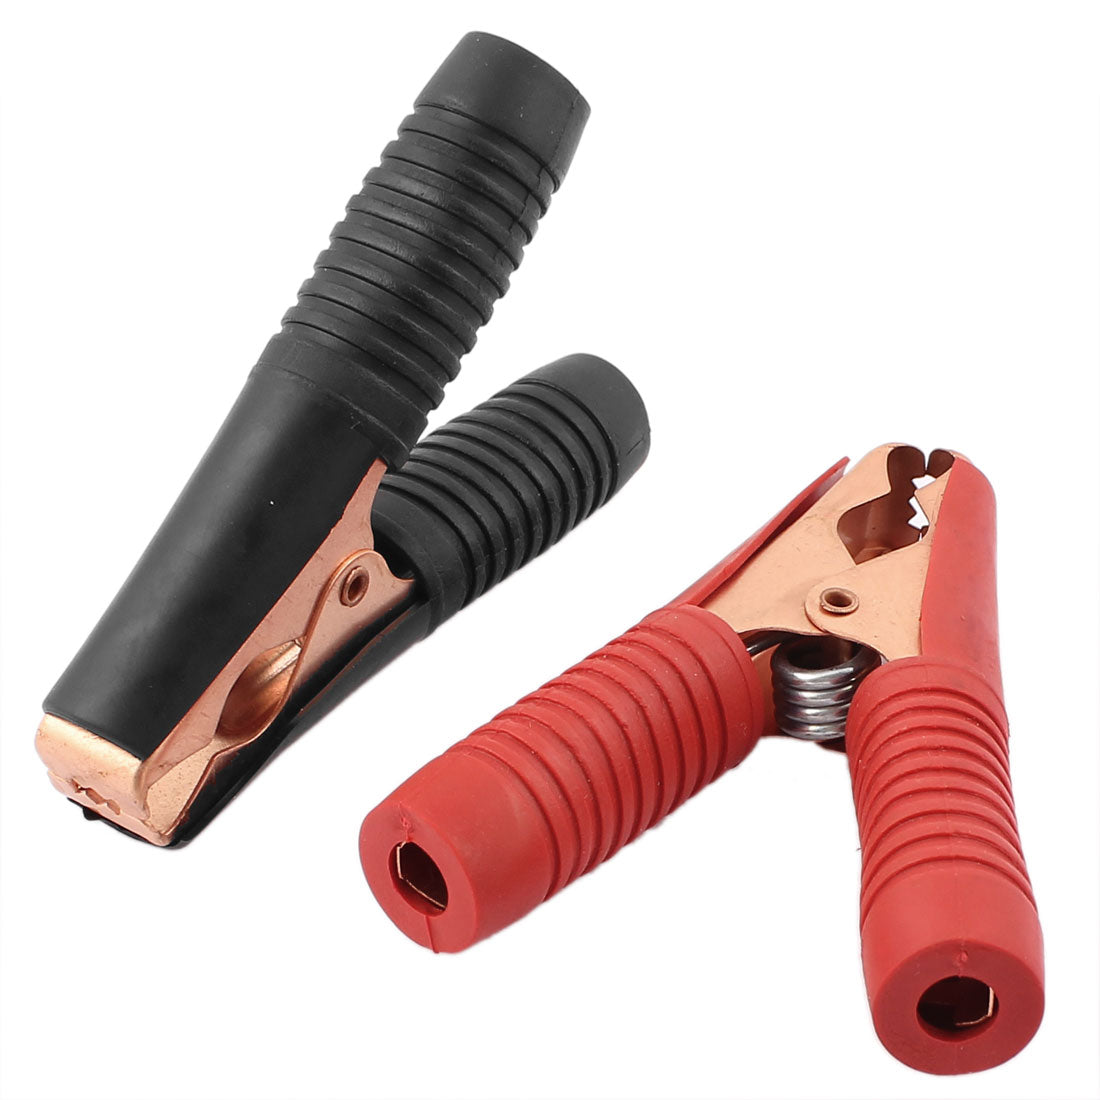 uxcell Uxcell 2PCS Insulated Car Auto Battery Clip Alligator Test Clamp Red Black Plastic Handle